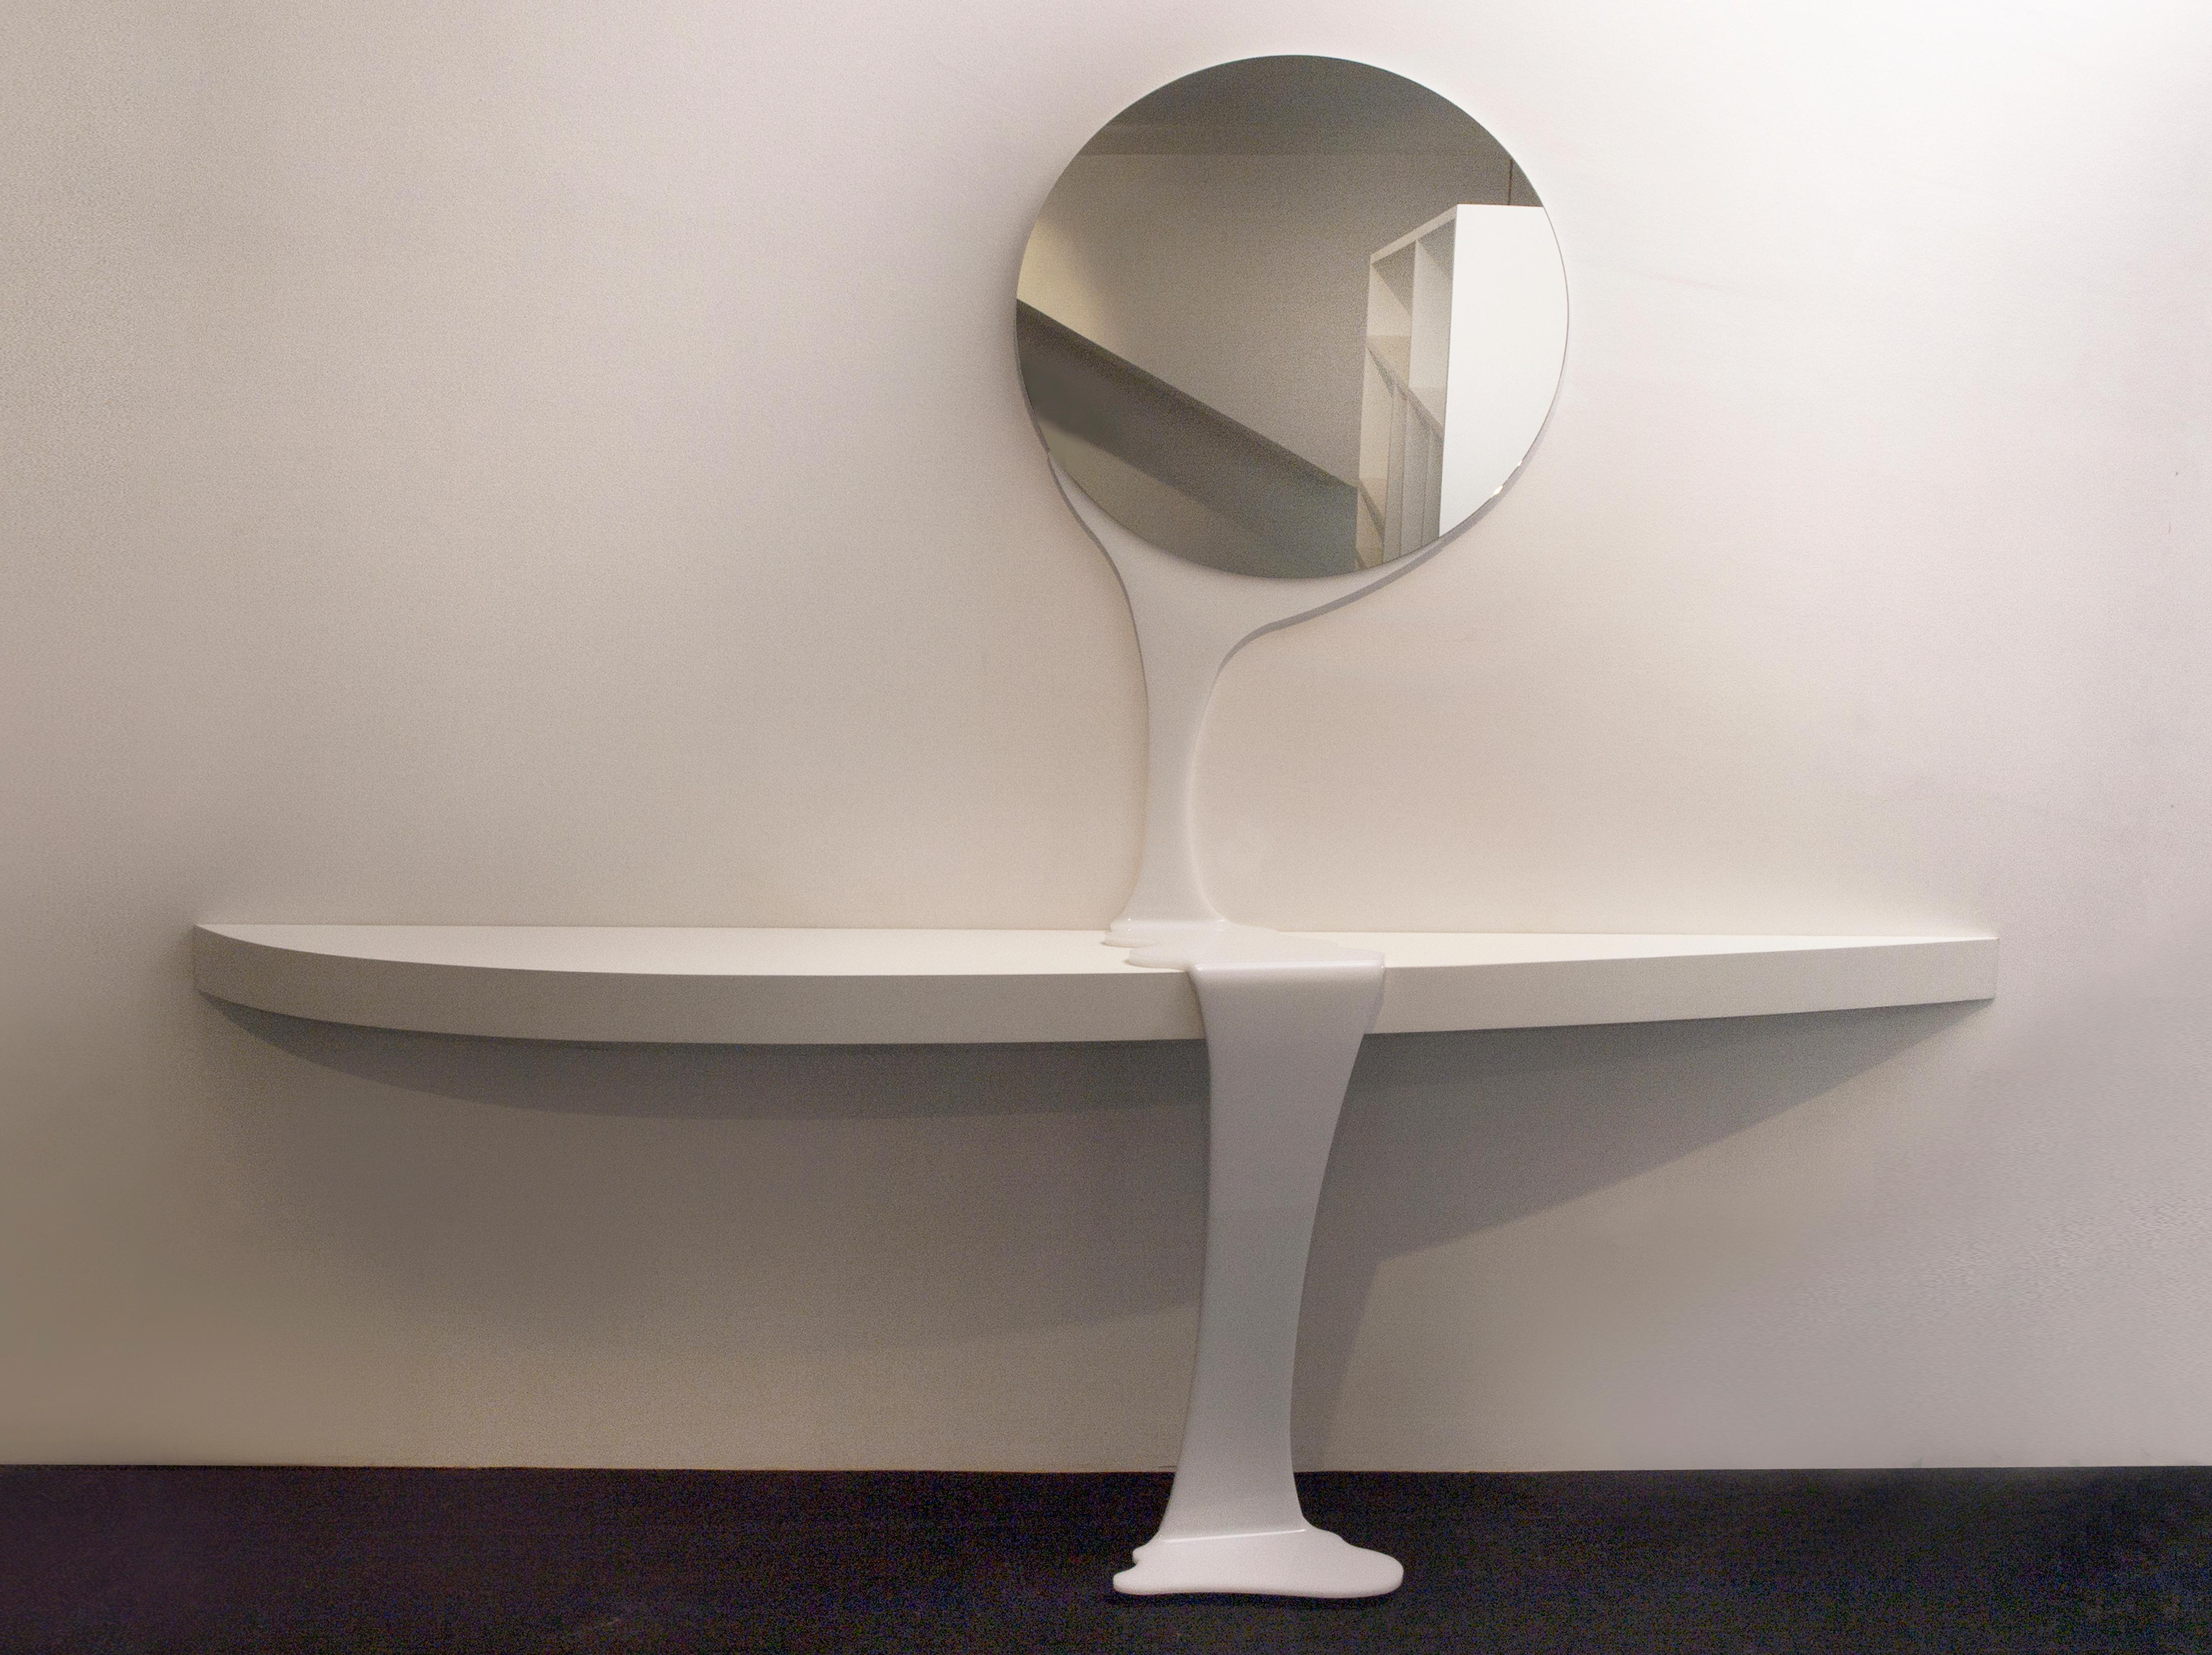 Consolable, created by the art-designer Raoul Gilioli, is a console, composed of a mirror and a functional and aerodynamic top .The two elements are connected by a plexiglass flow, that becomes the aesthetic leg of the console.
The designer has